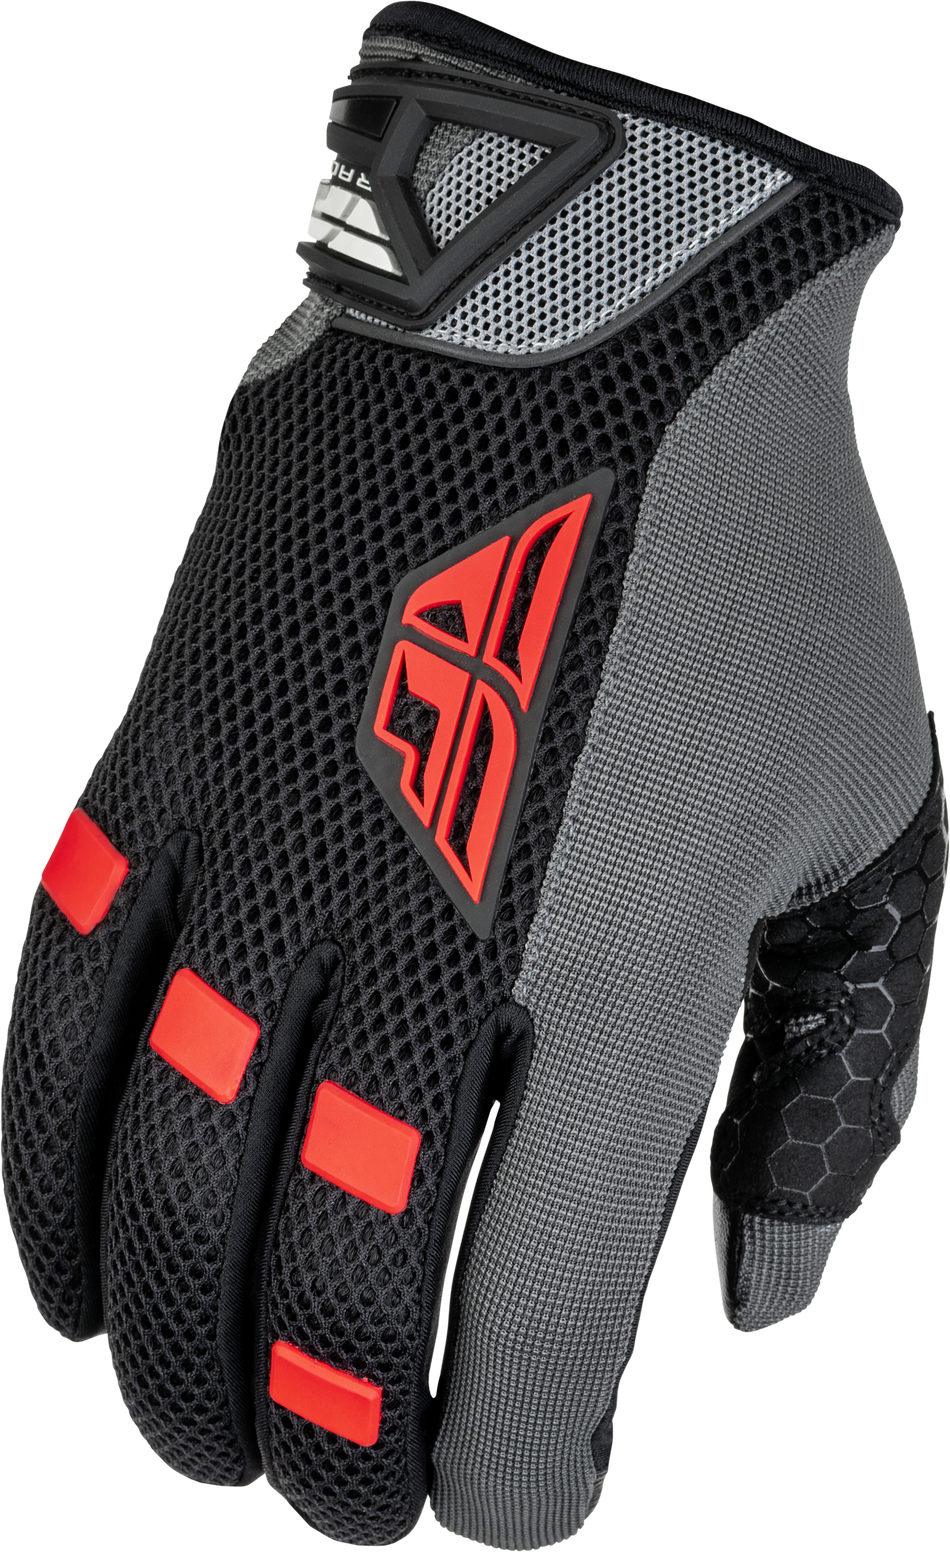 FLY RACING Coolpro Gloves Black/Red Sm 476-4026S